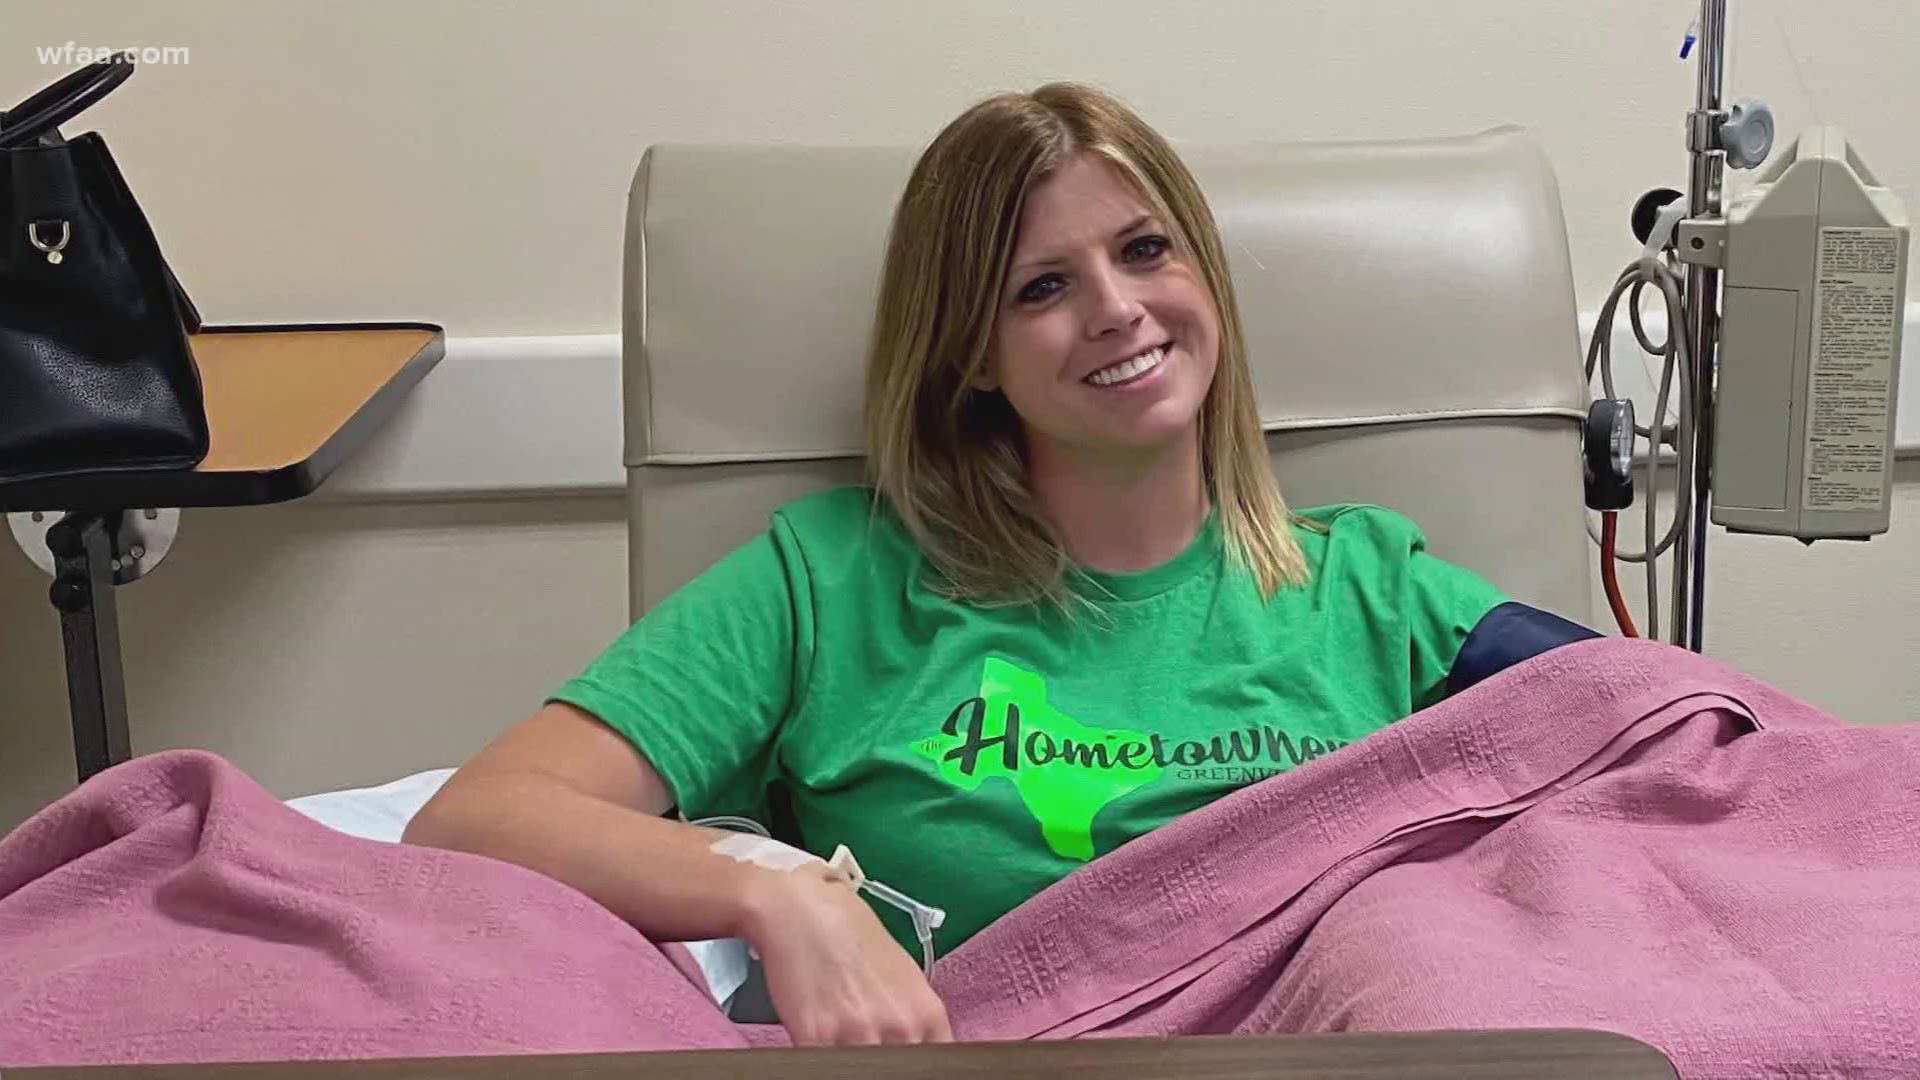 A lot of people are hesitant to donate blood or get tested for bone marrow out of concern for contracting COVID-19. One woman saw a need and stepped up.